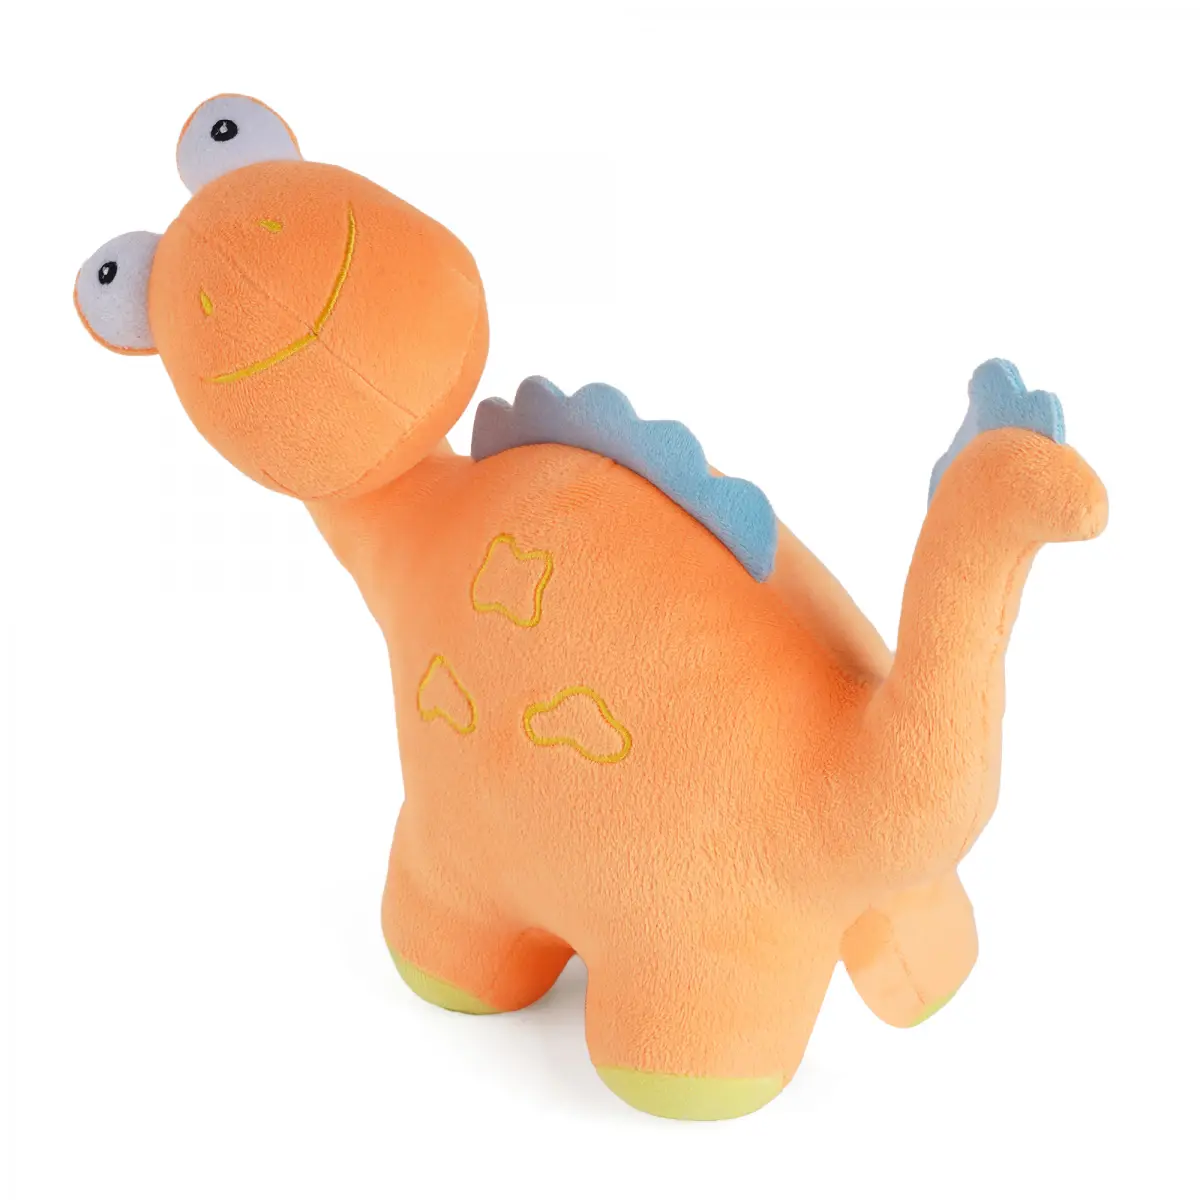 Huggable Cuddly Spiny Dino Stuffed Toy By Fuzzbuzz, Soft Toys for Kids, Cute Plushies Orange, For Kids Of Age 2 Years & Above, 26cm